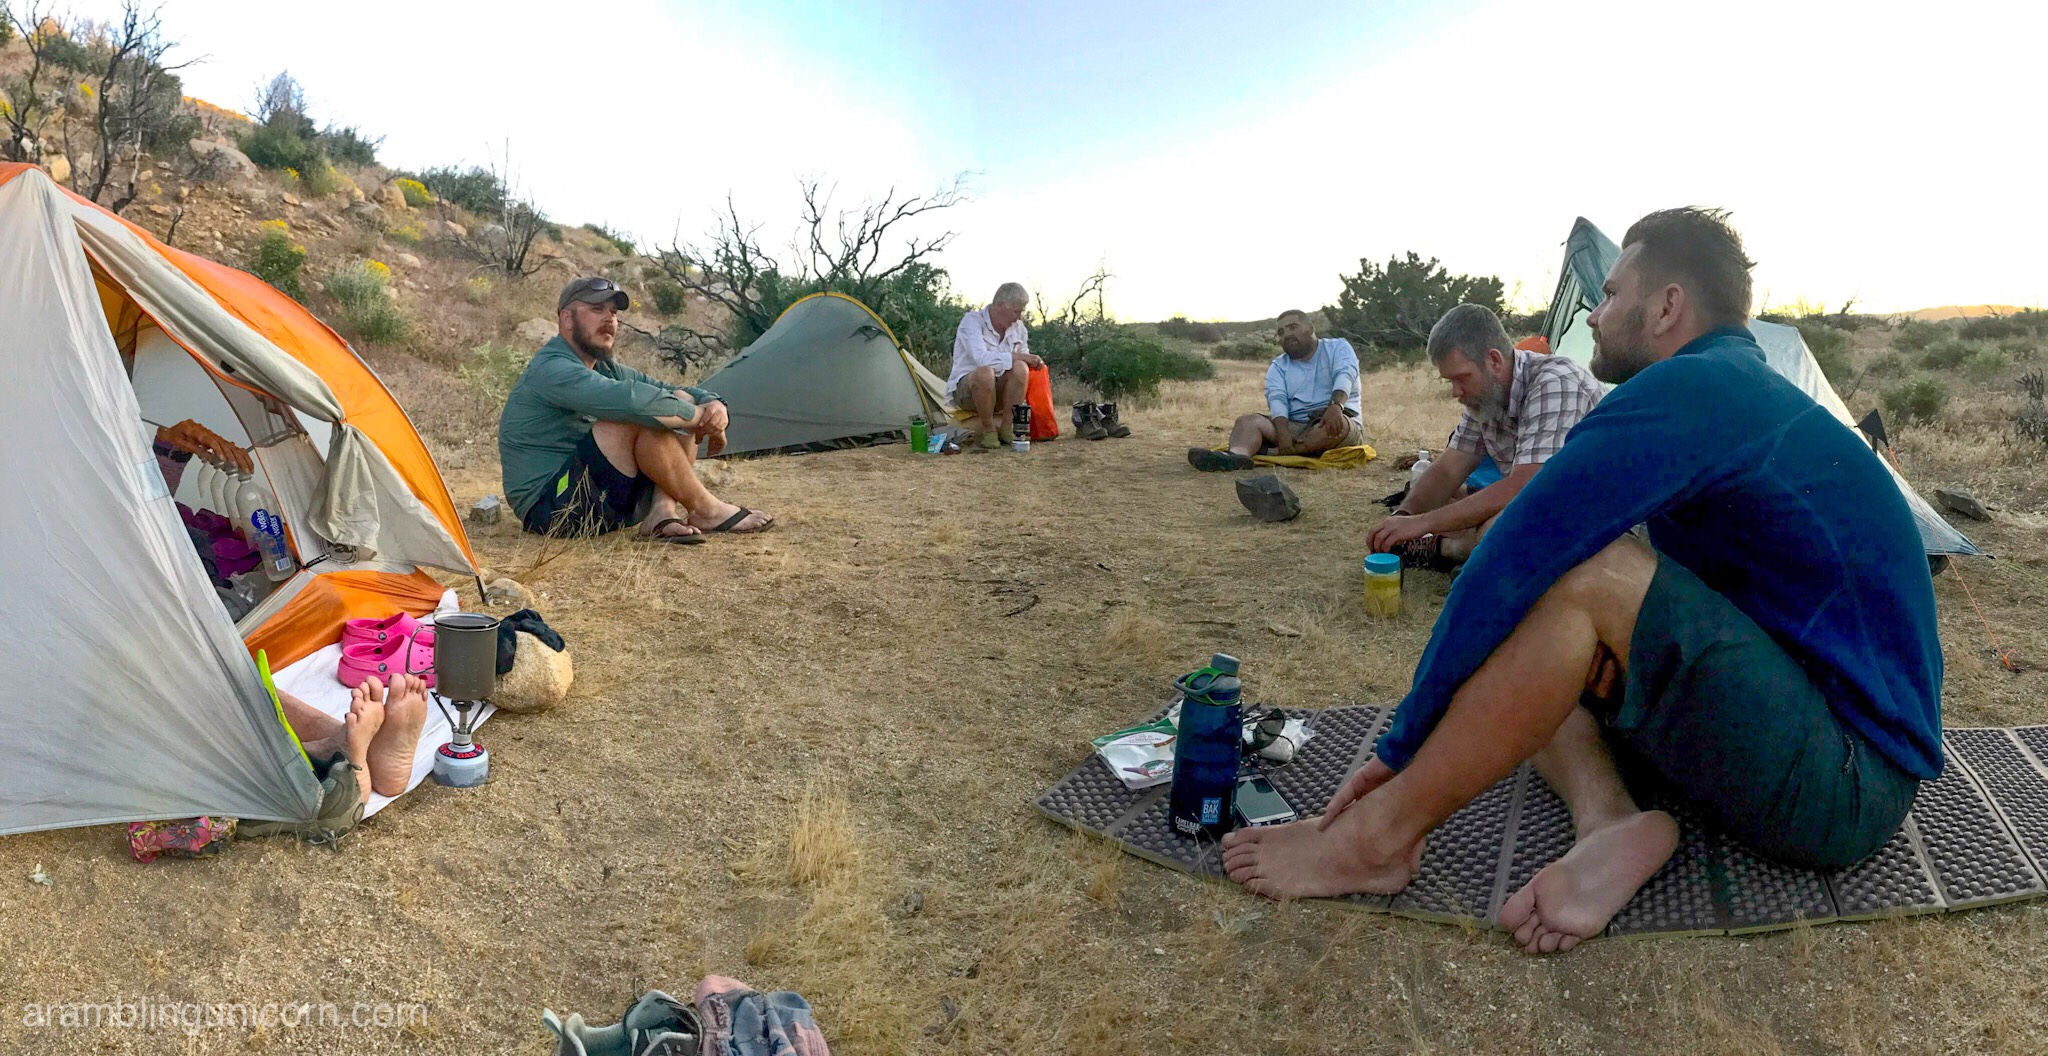 Pacific Crest Trail Day 8 – Making Friends in the Desert